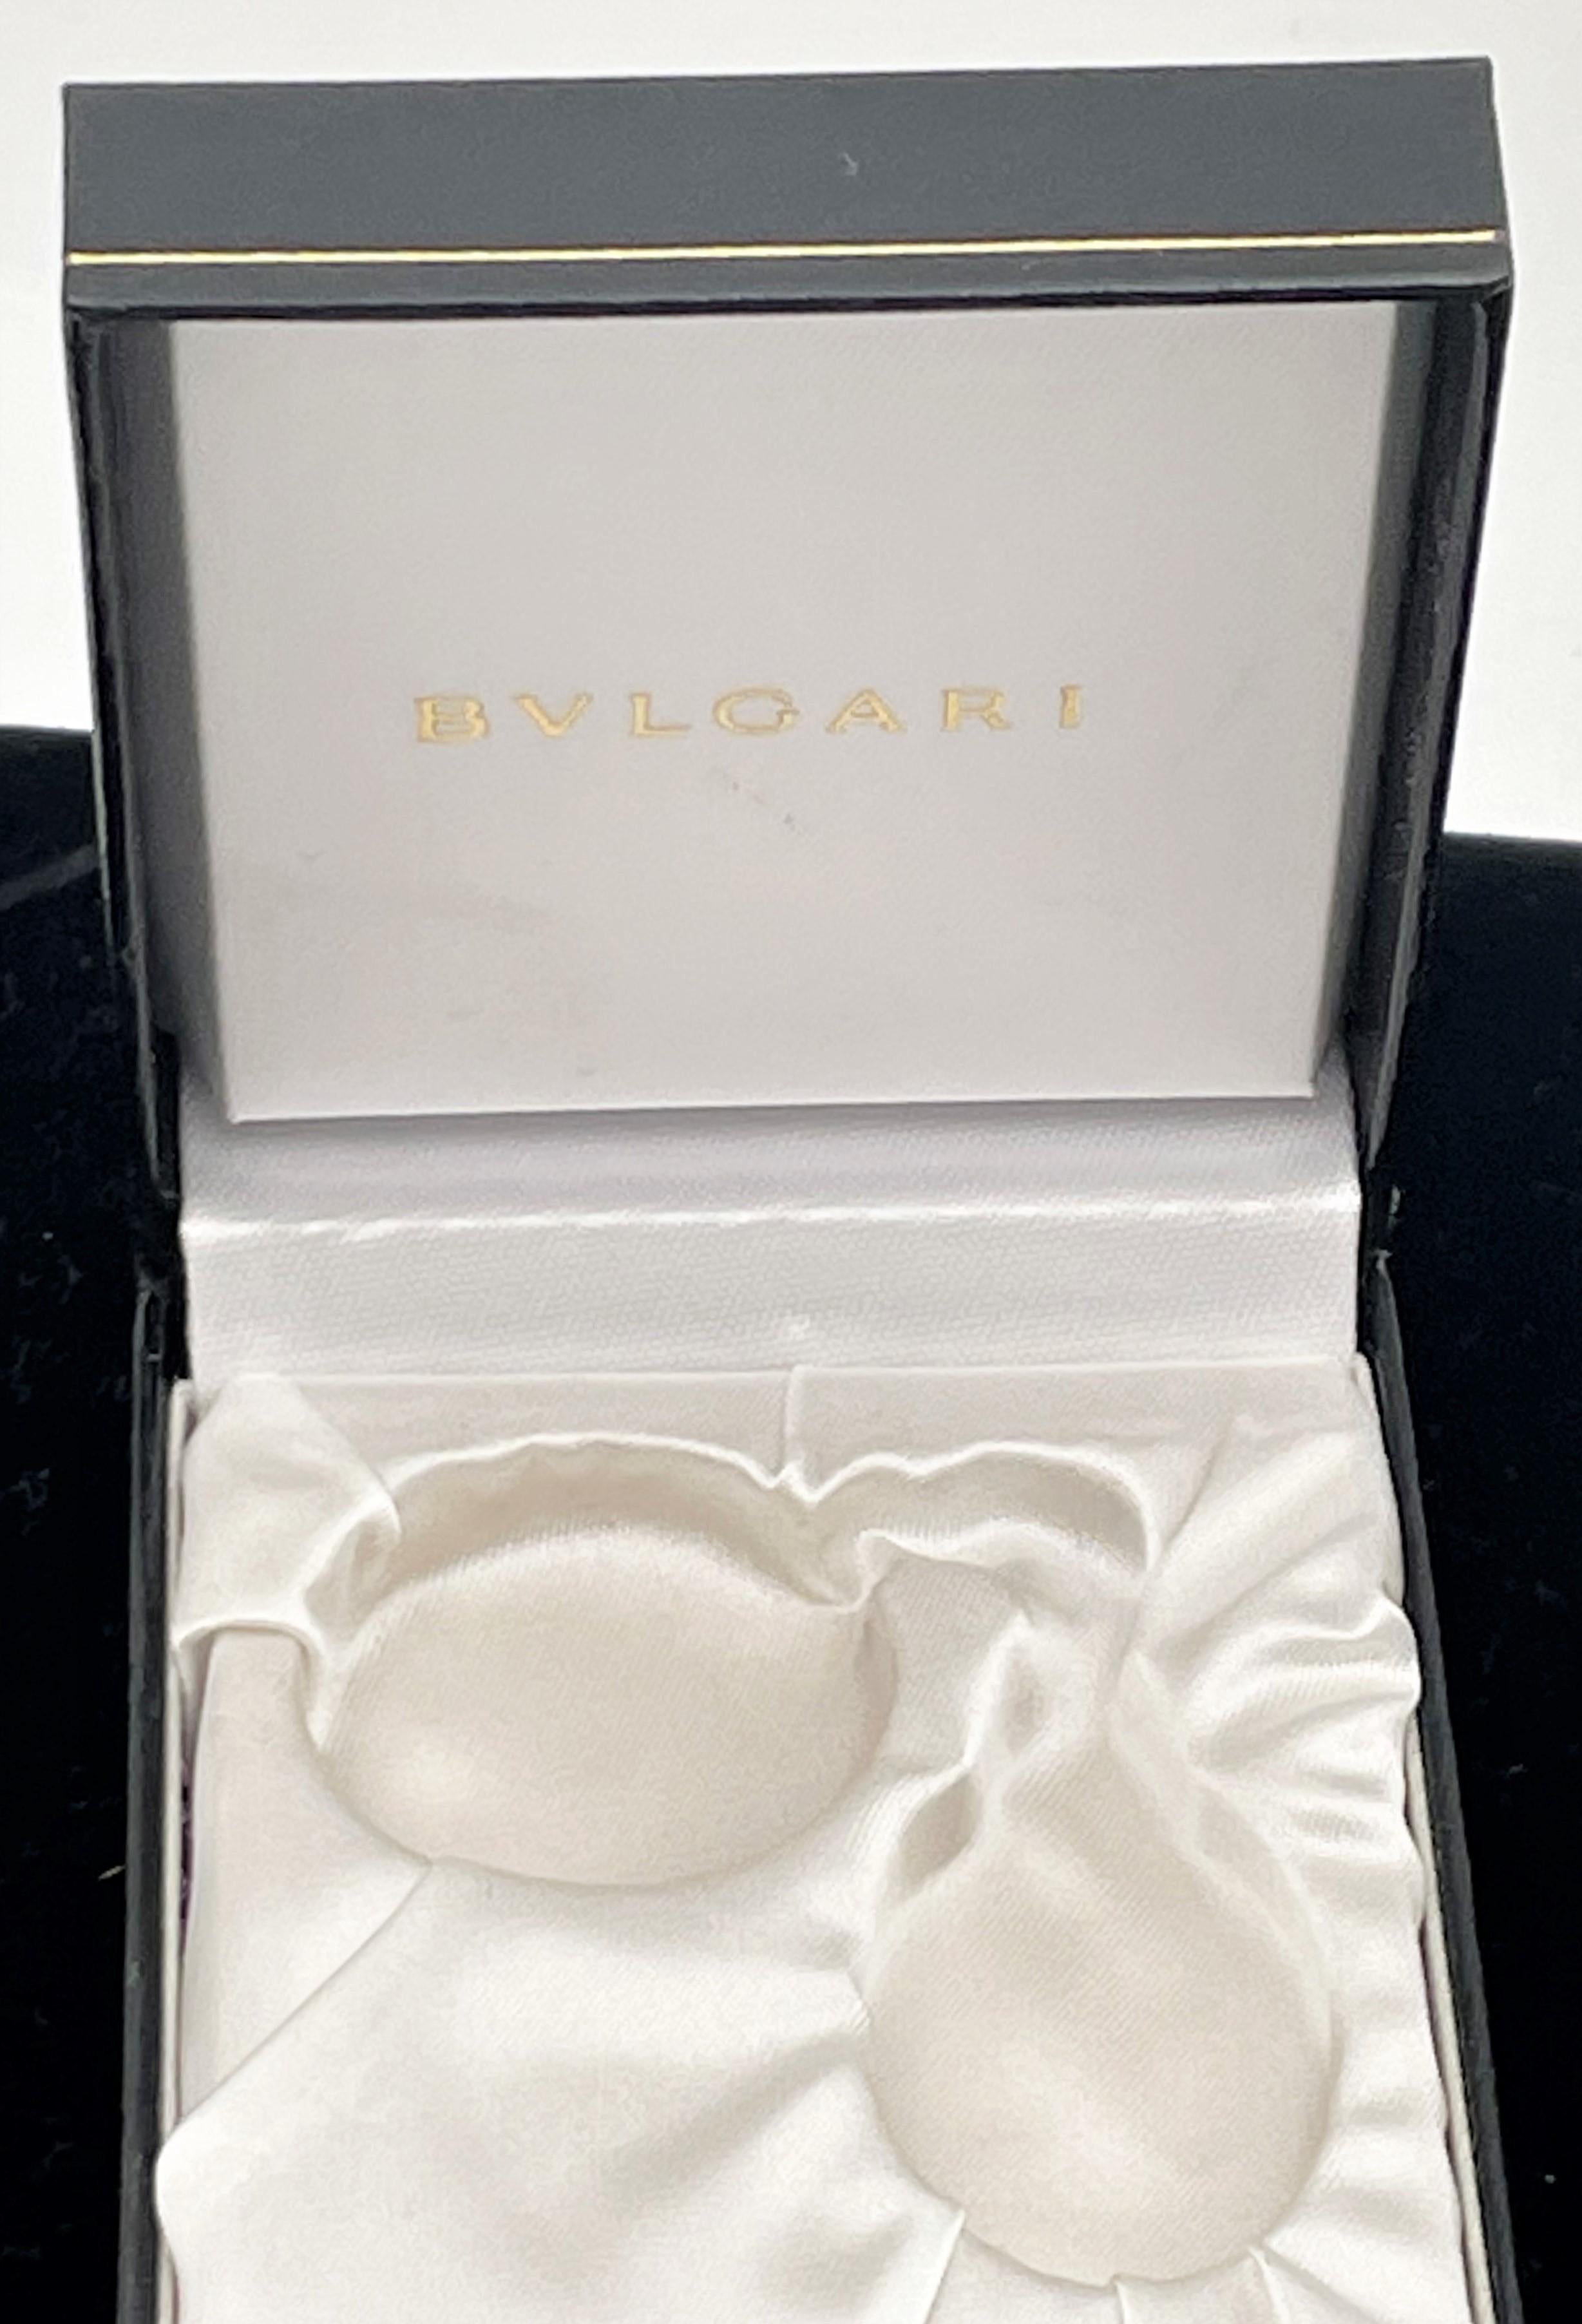 Bulgari Bvlgari Sterling Silver Lucky 7 Keychain New in Box For Sale 1